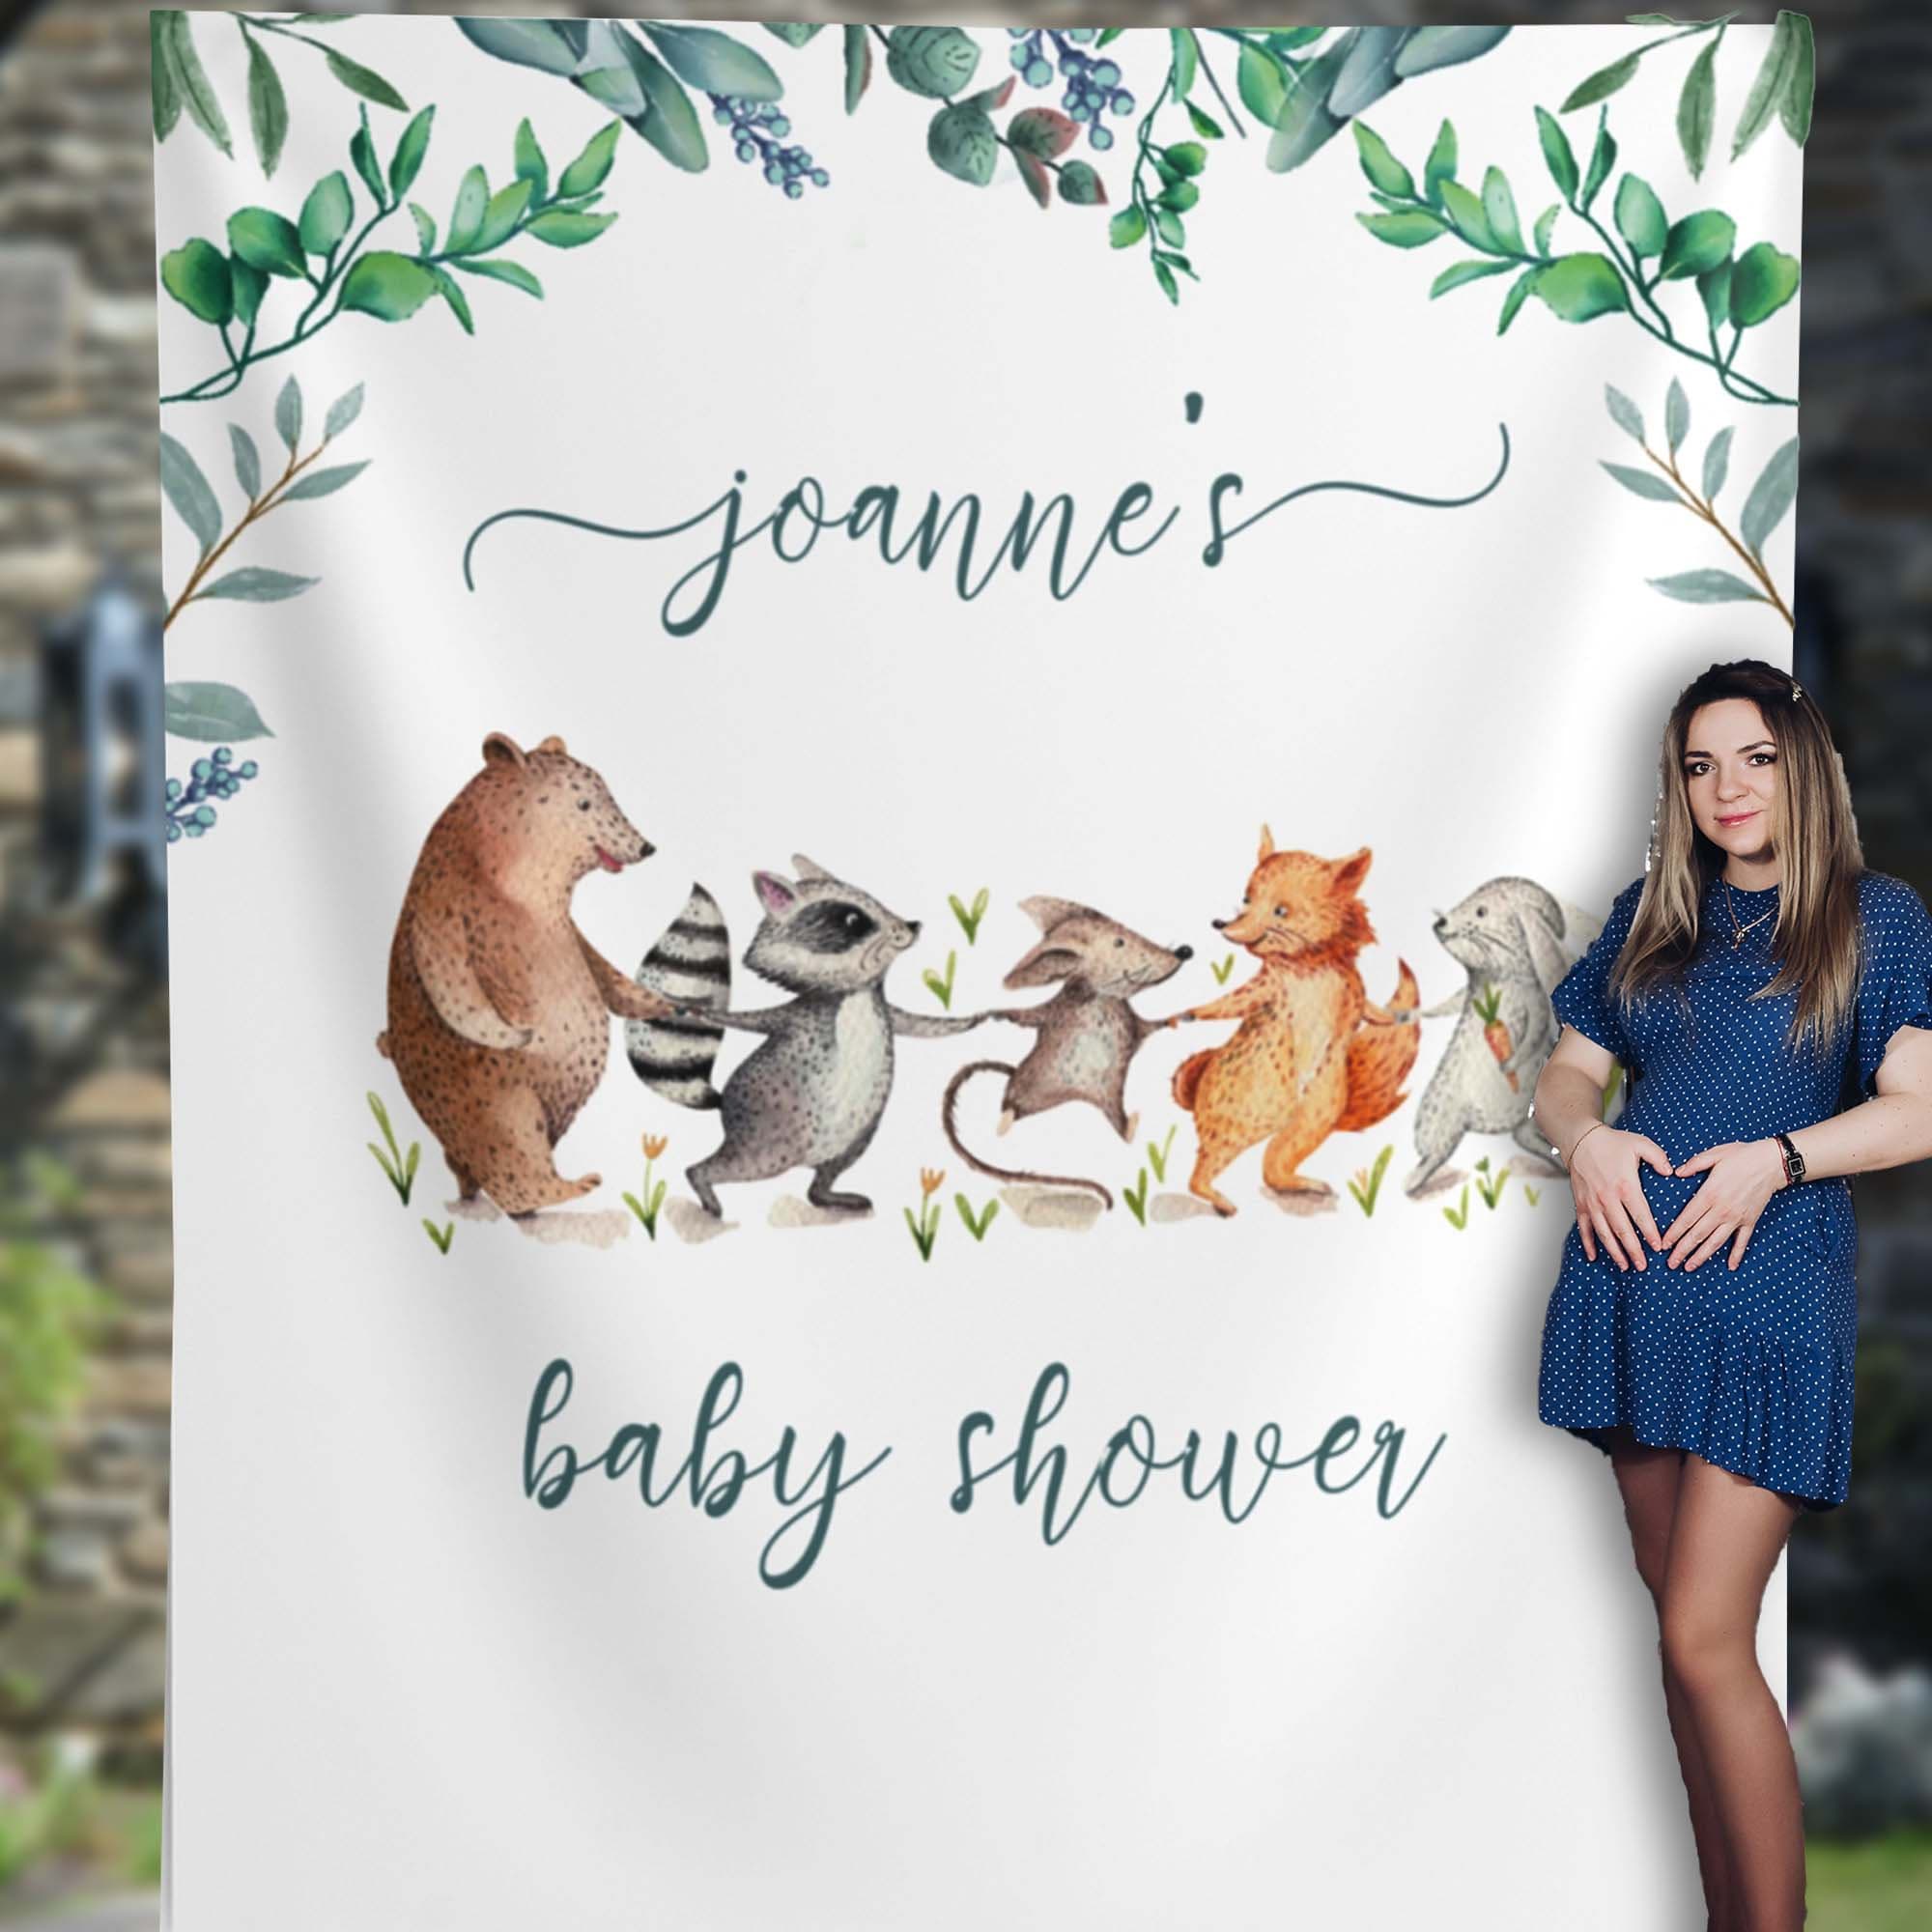 Cute Animals Baby Shower Backdrop| Woodland Animals Baby Shower Decor| Greenery Baby Shower Boy | Gender Neutral Decorations